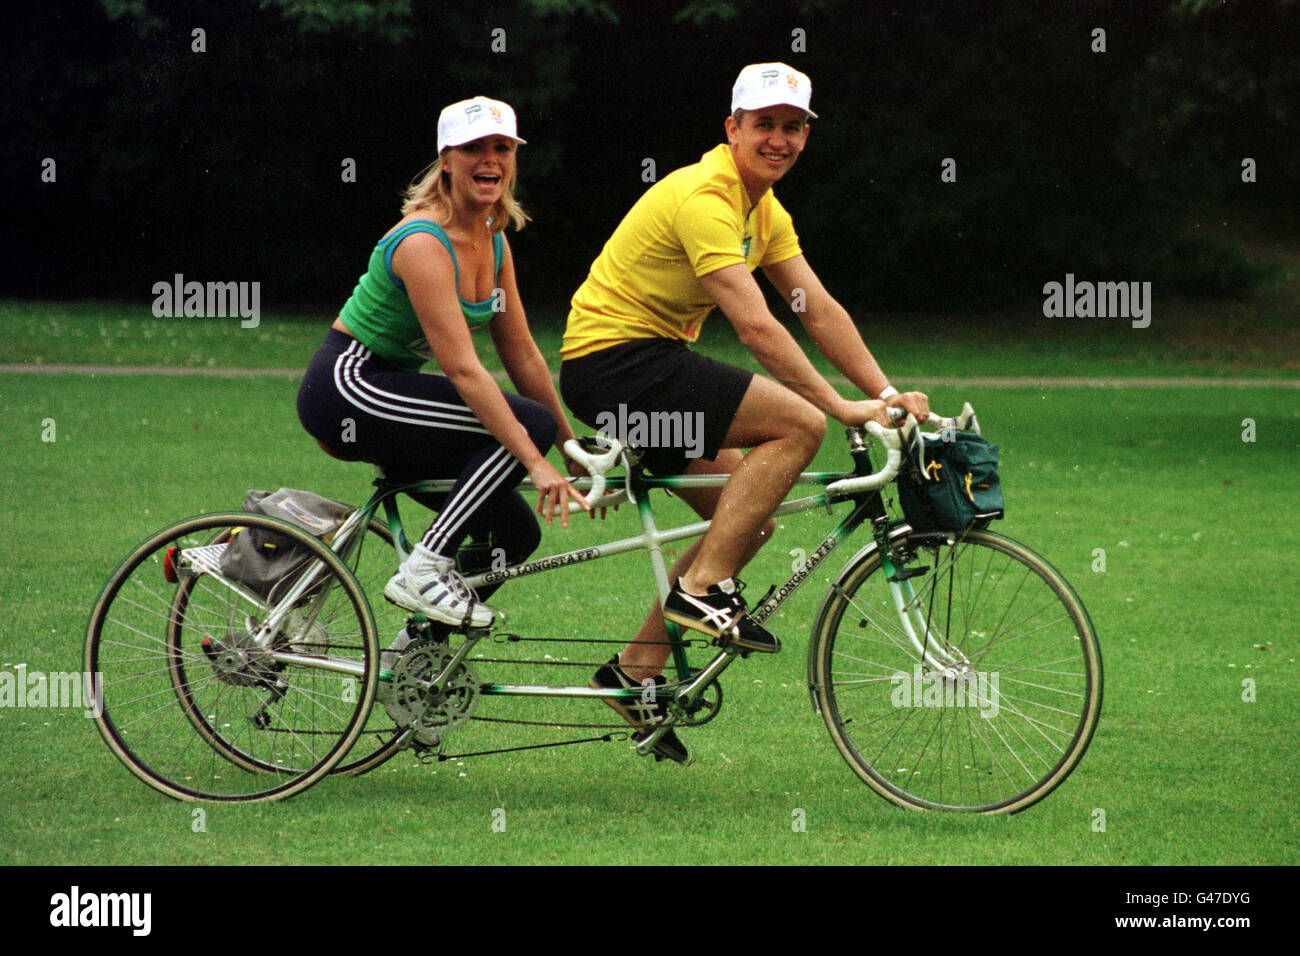 GARY LINEKER AND ACTRESS SAMANTHA JANUS AT THE LAUNCH OF A BIKEATHON IN AID OF CANCER RESEARCH. Stock Photo